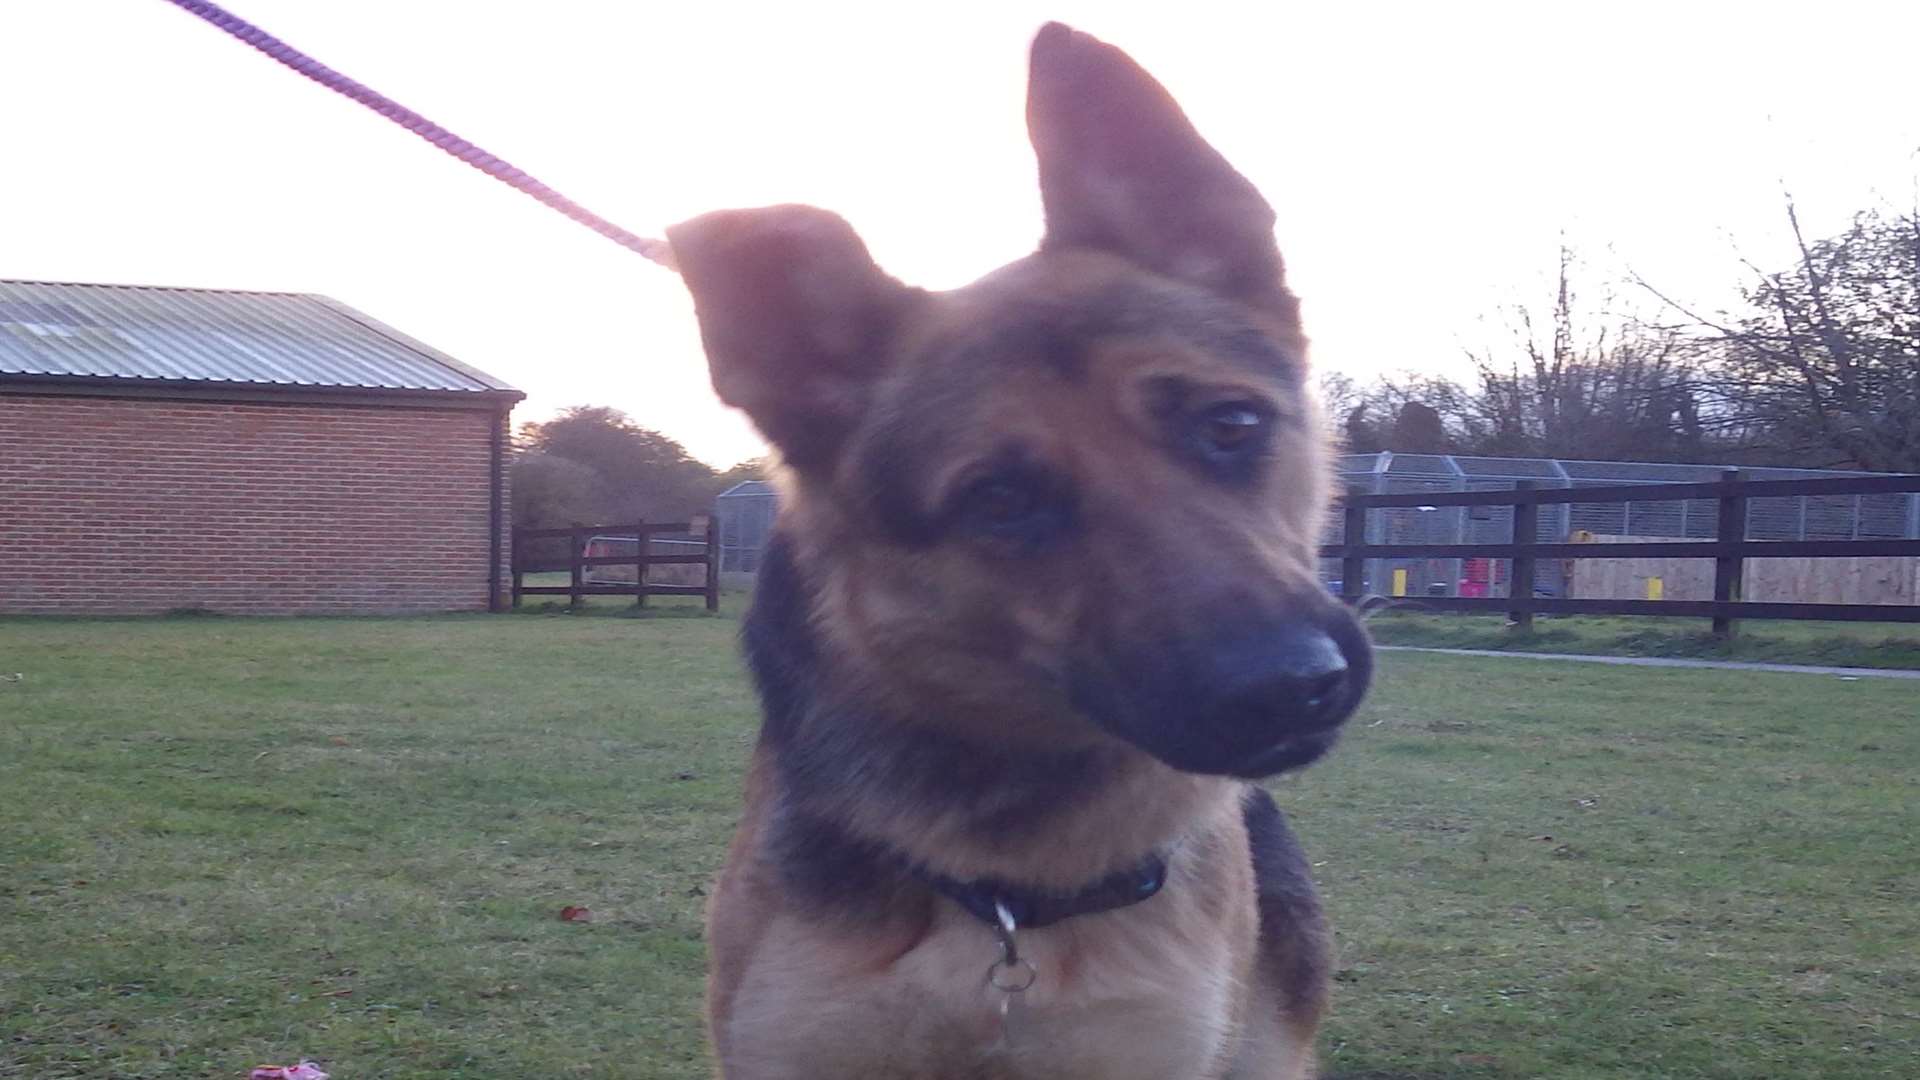 The German shepherd is now being cared for in Leybourne